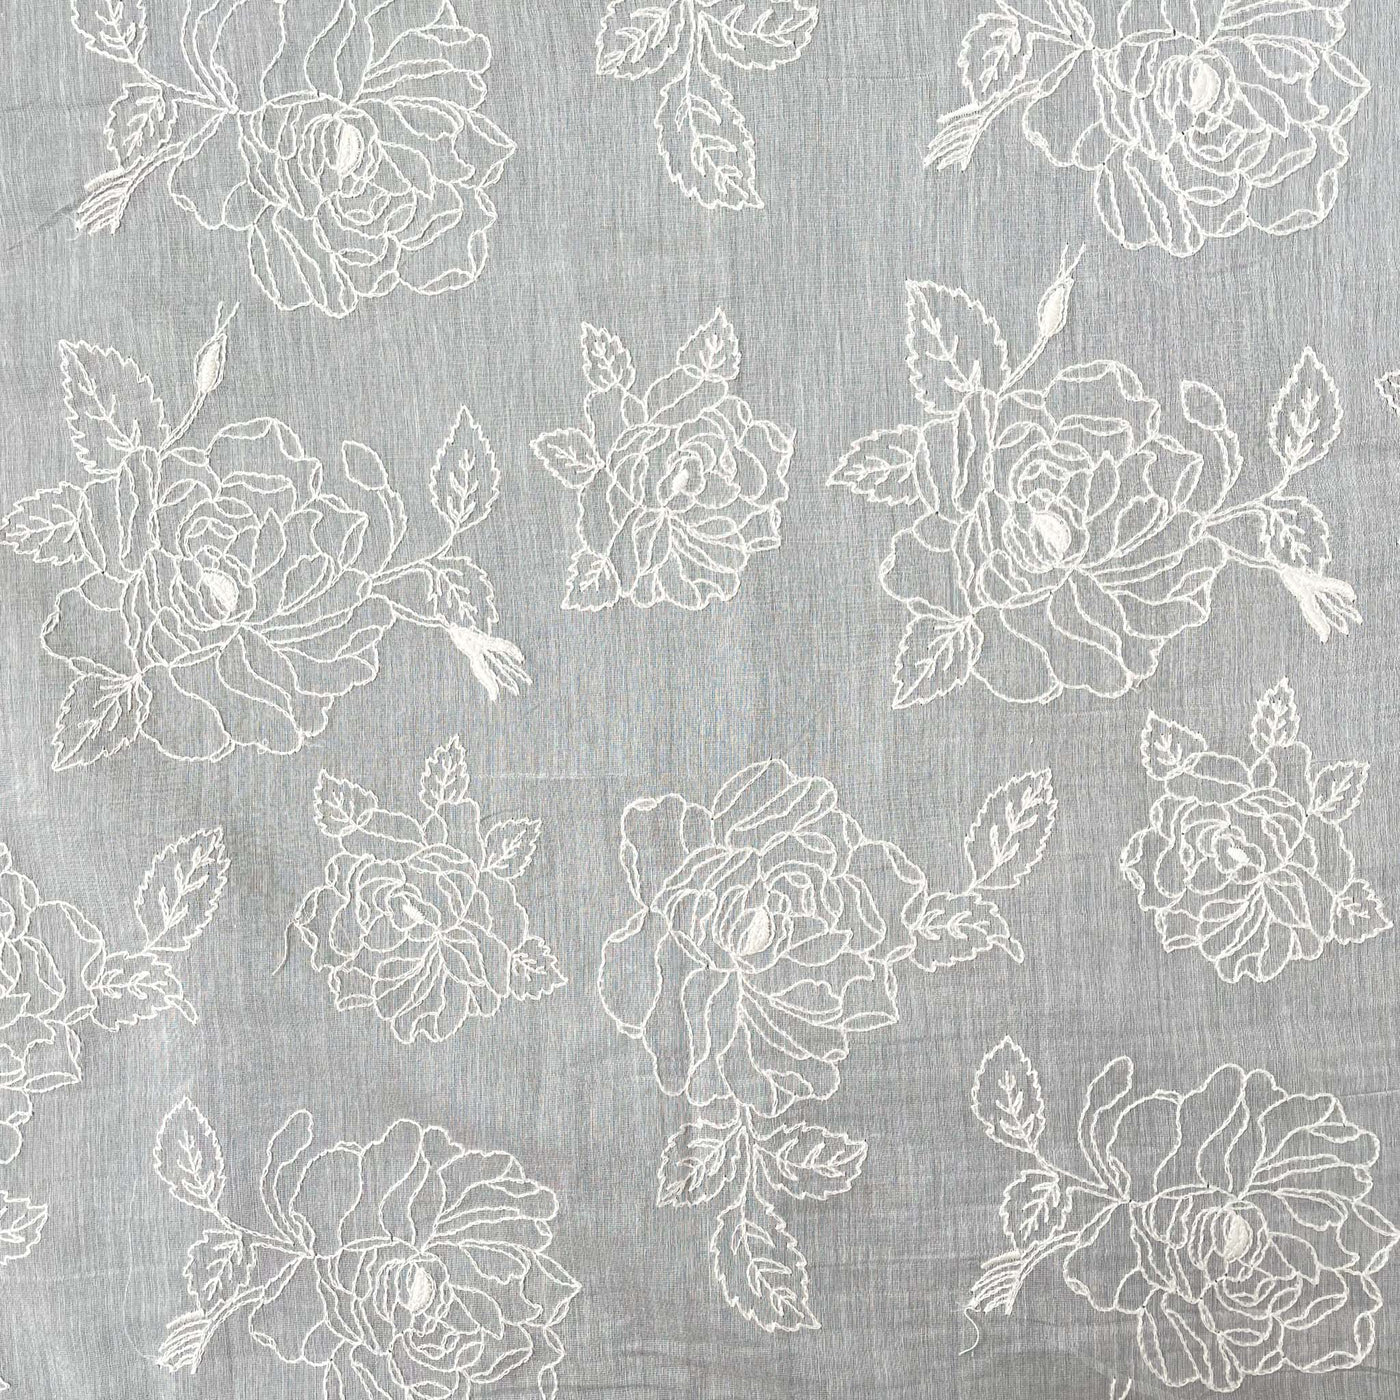 Fabric Pandit Cut Piece (CUT PIECE) White Dyeable Wild Flower Embroidered Pure Chanderi Fabric (Width 44 Inches)